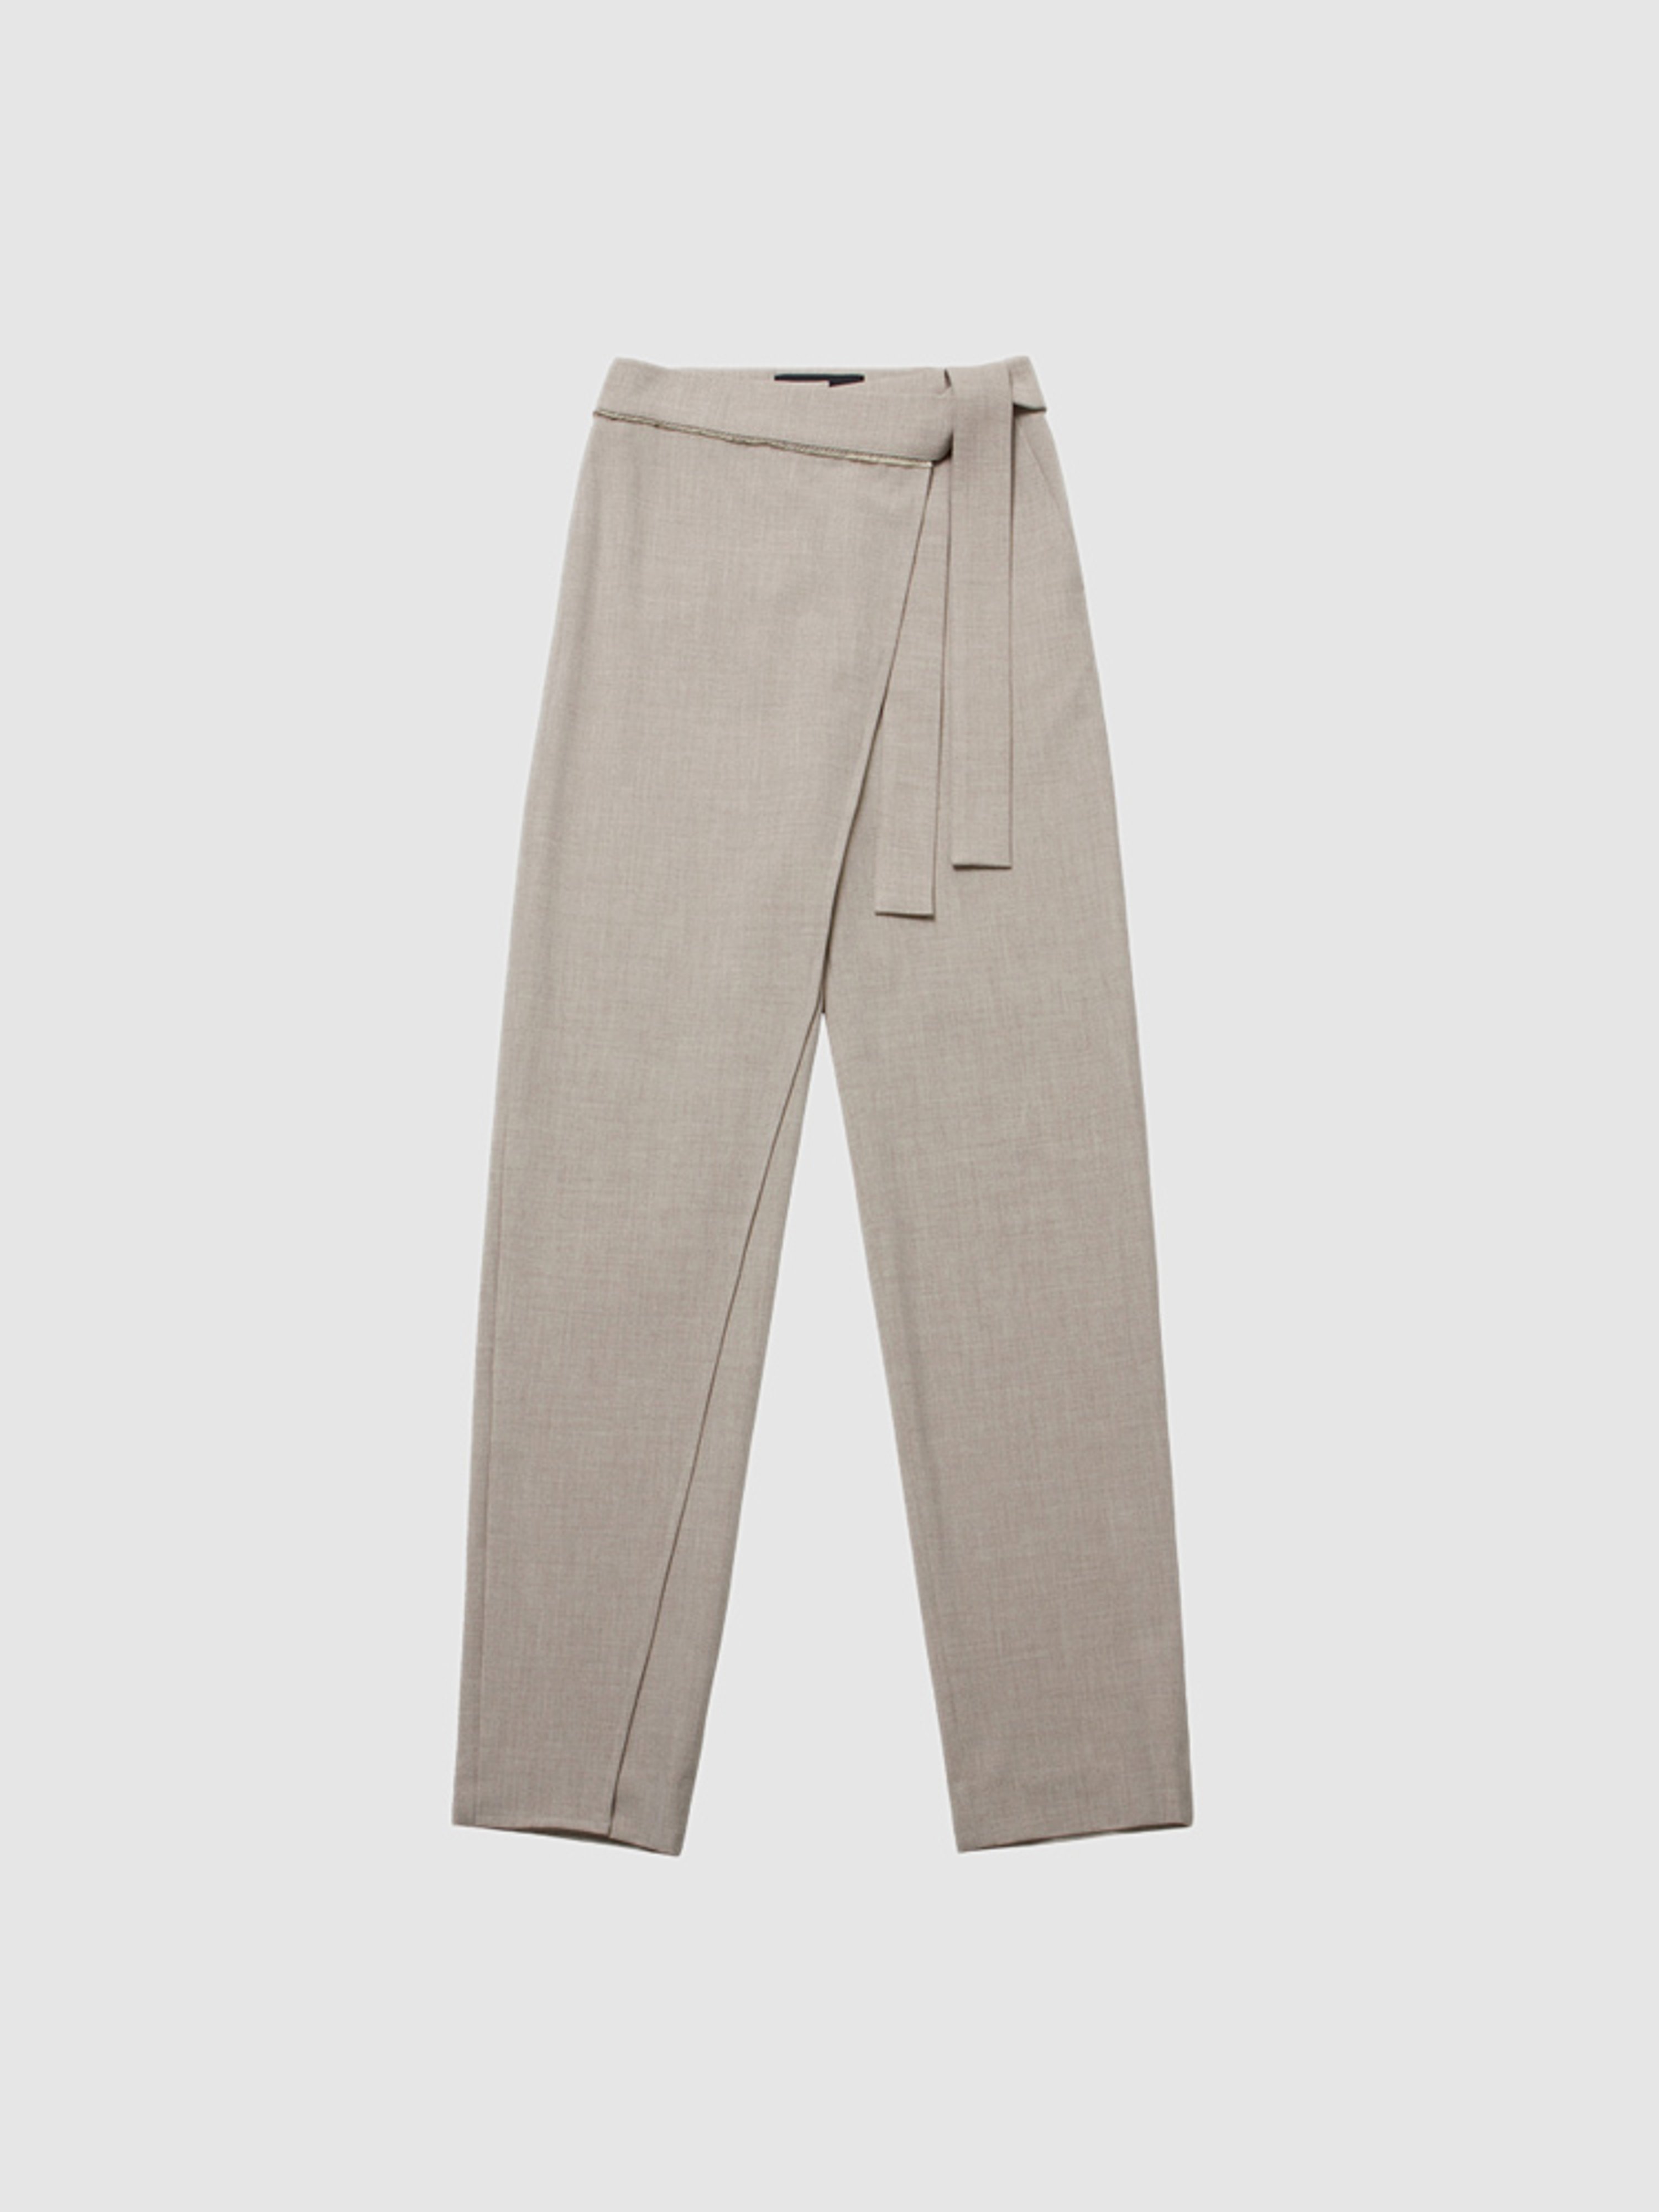 ANDERSSON BELL ANDERSSON BELL EMMA WRAP TAPERED PANTS